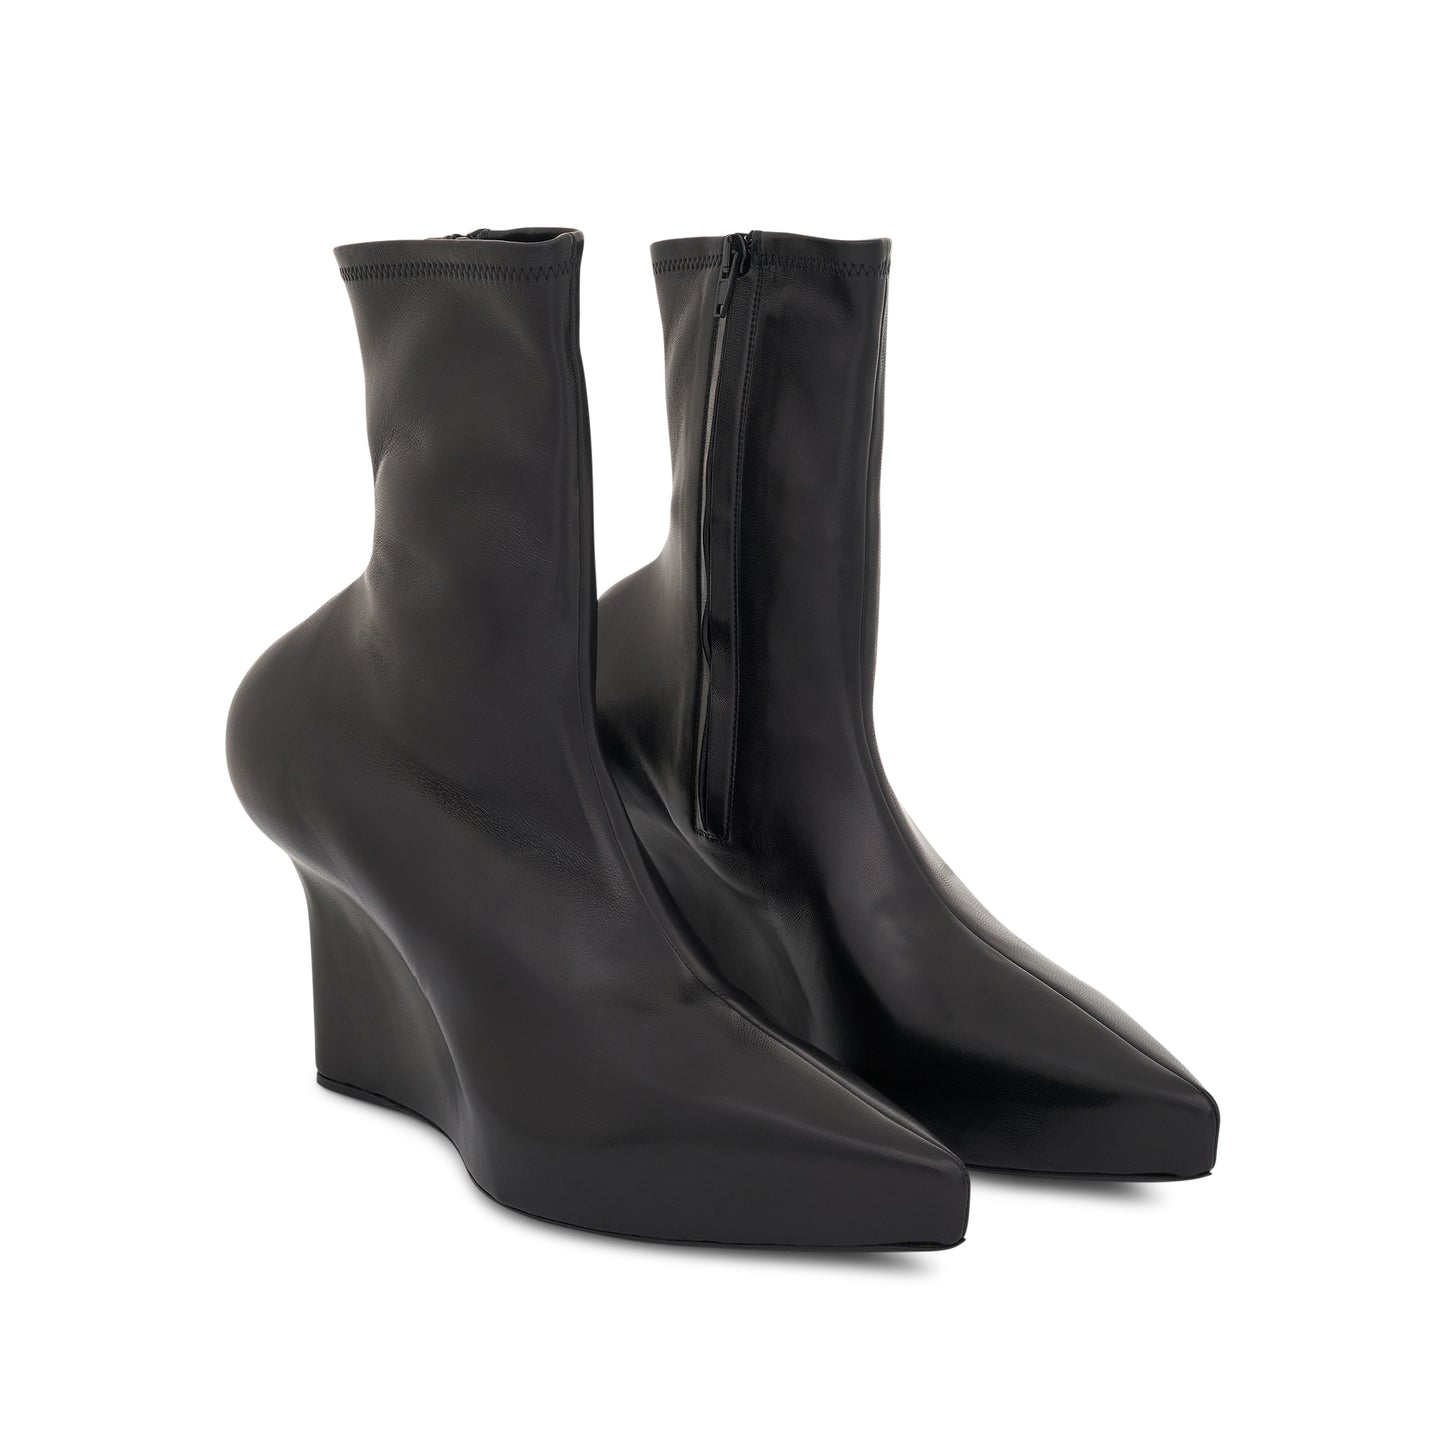 Wedge Ankle Boot in Stretch Leather in Black